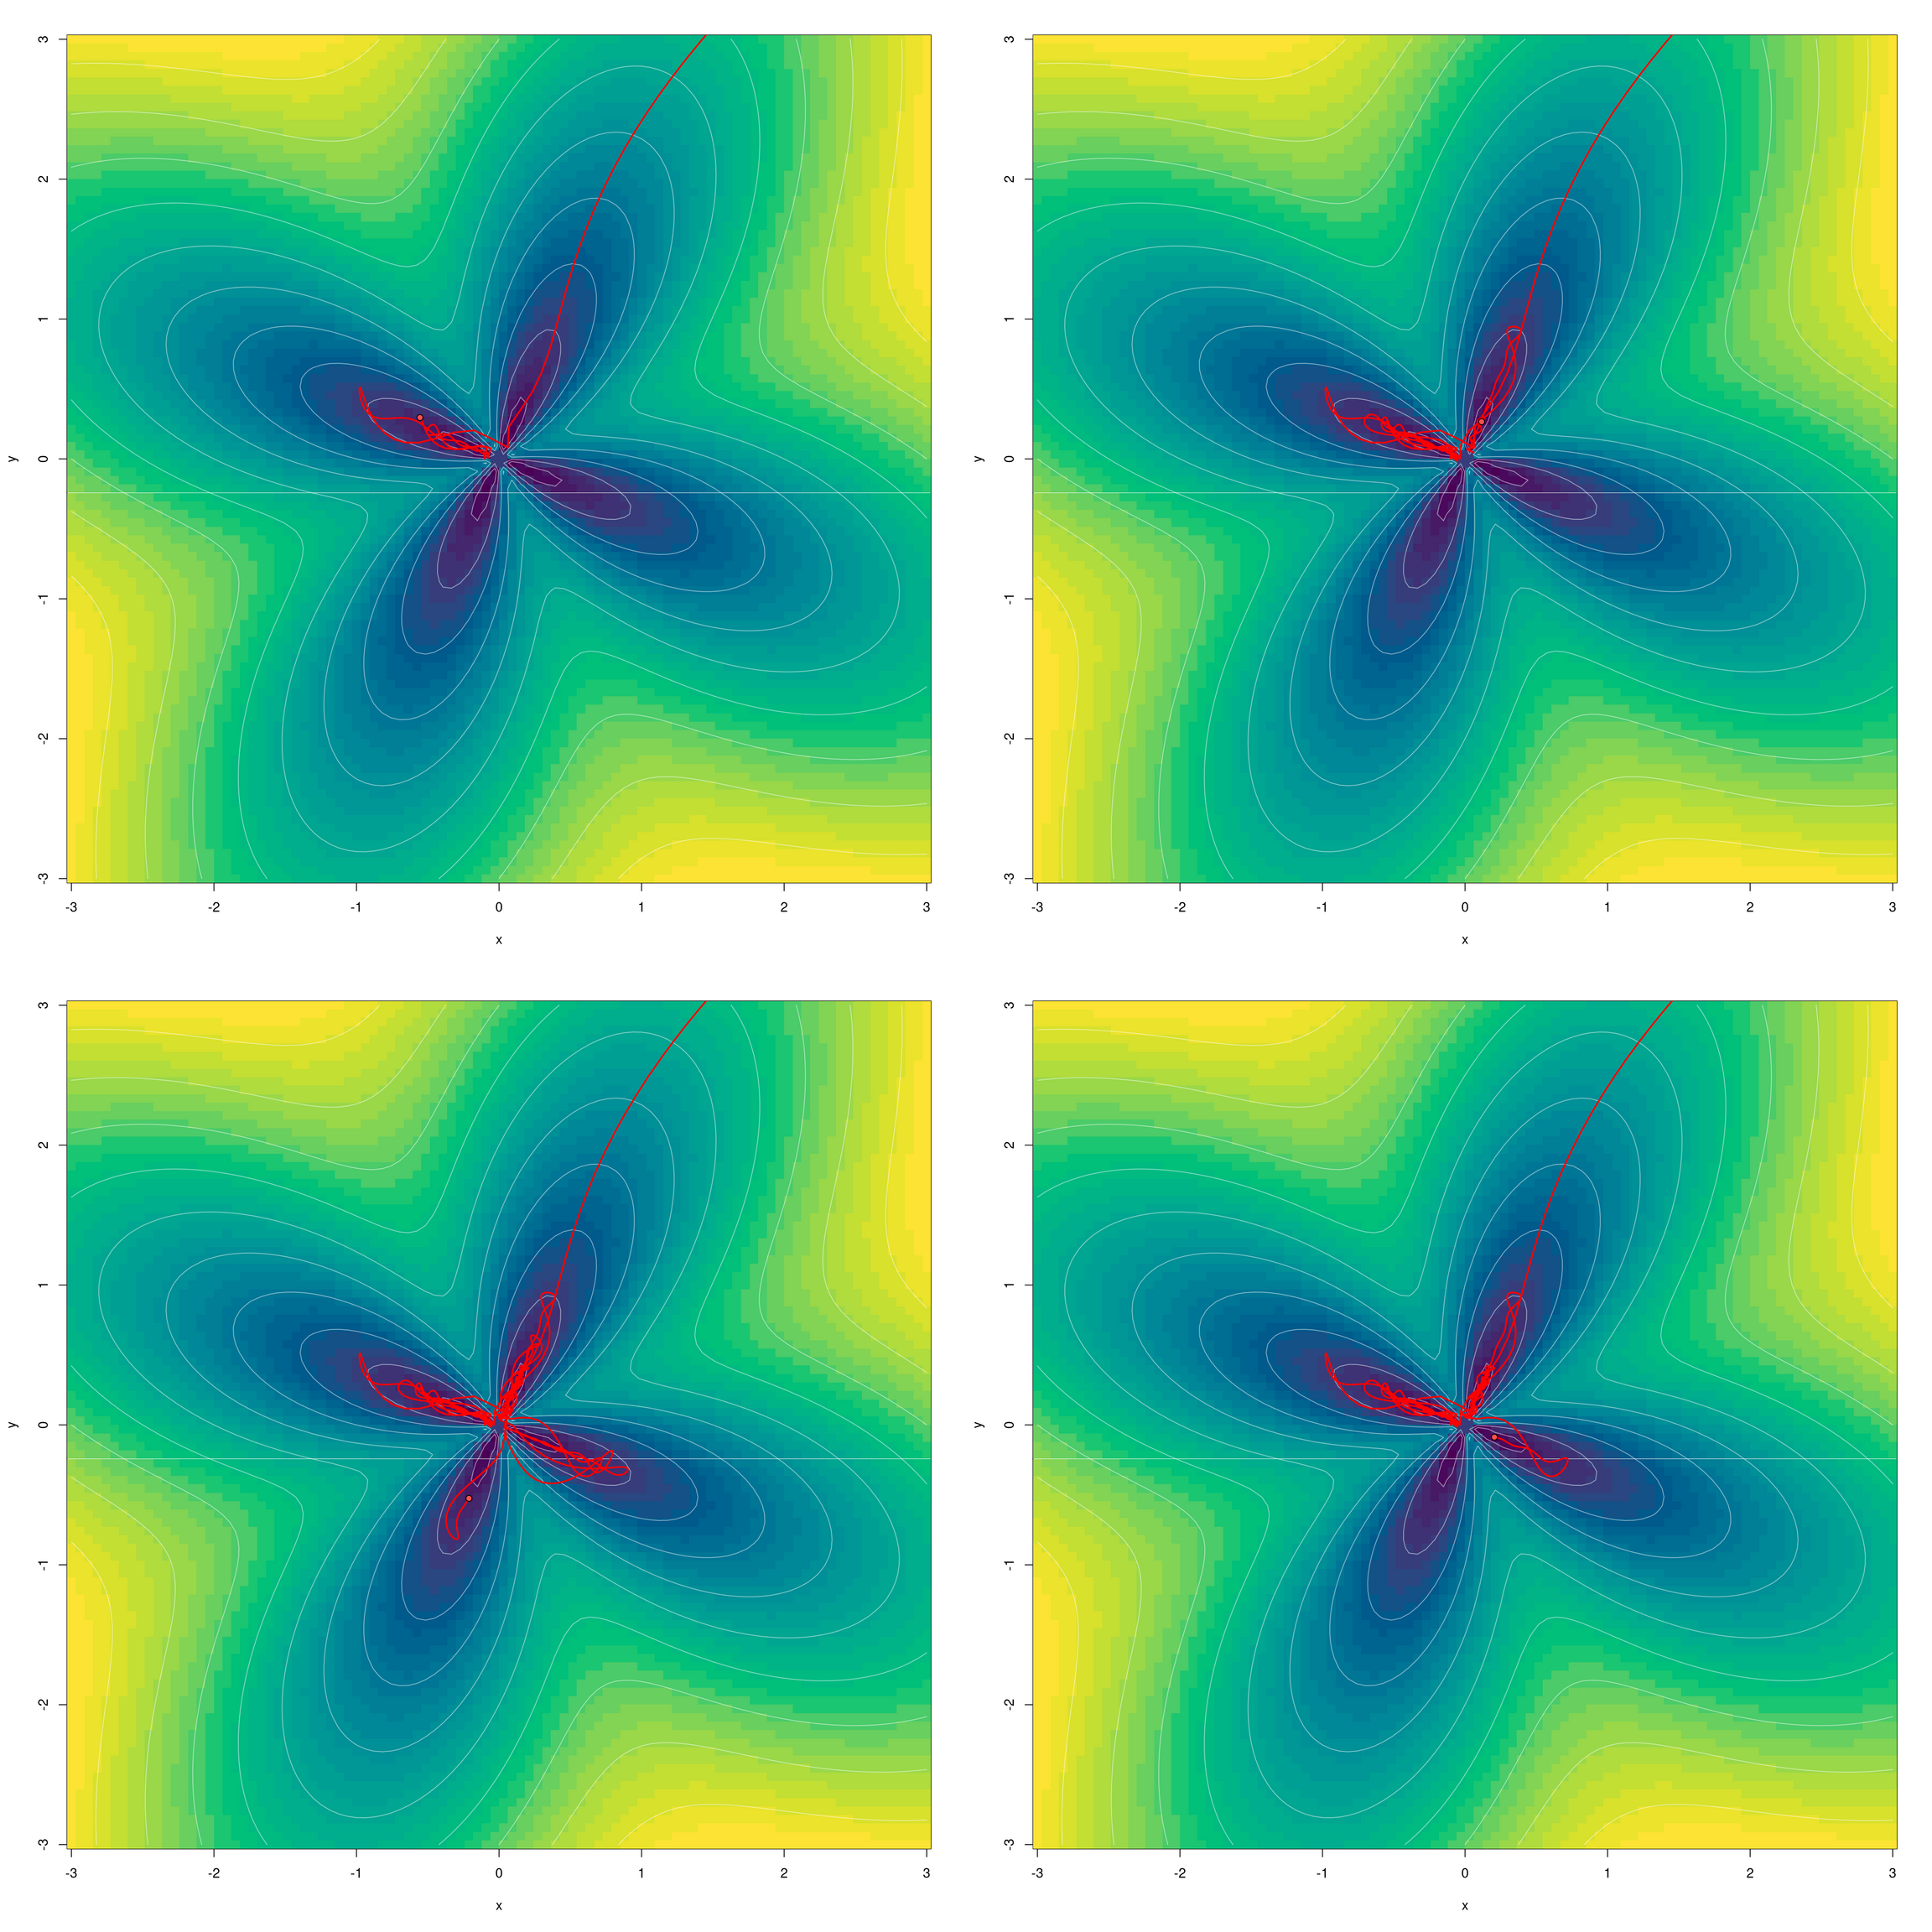 Minimizing the flower function with AdamW, lr = 0.1: Successive “exploration” of petals. Steps (clockwise): 300, 700, 900, 1300.